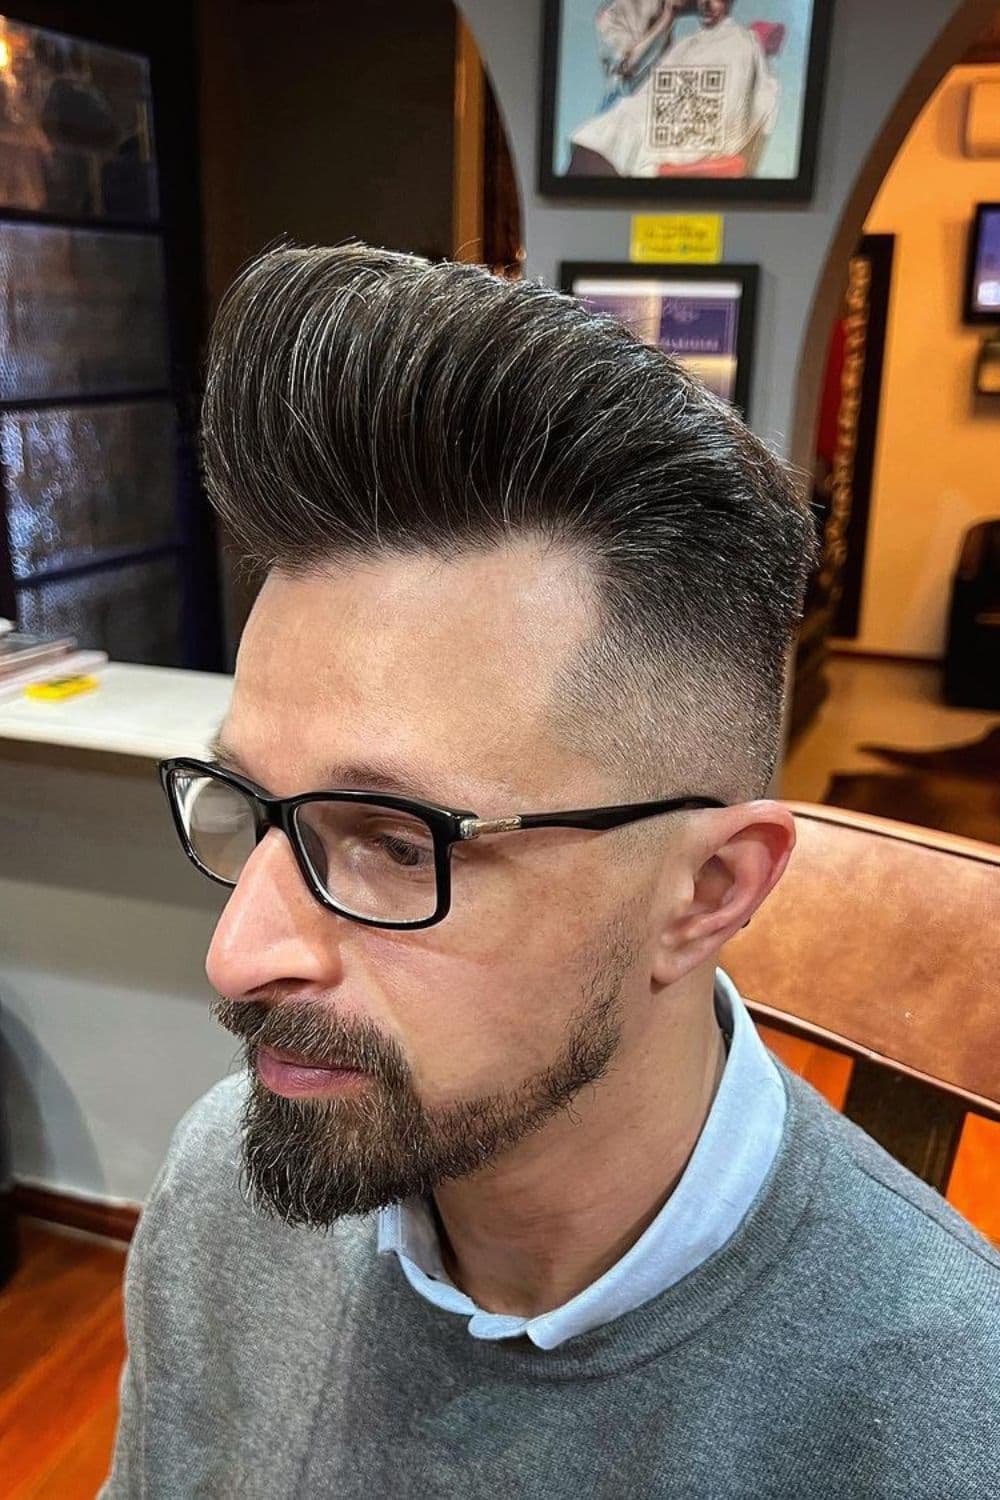 A man with a black and gray pompadour haircut.